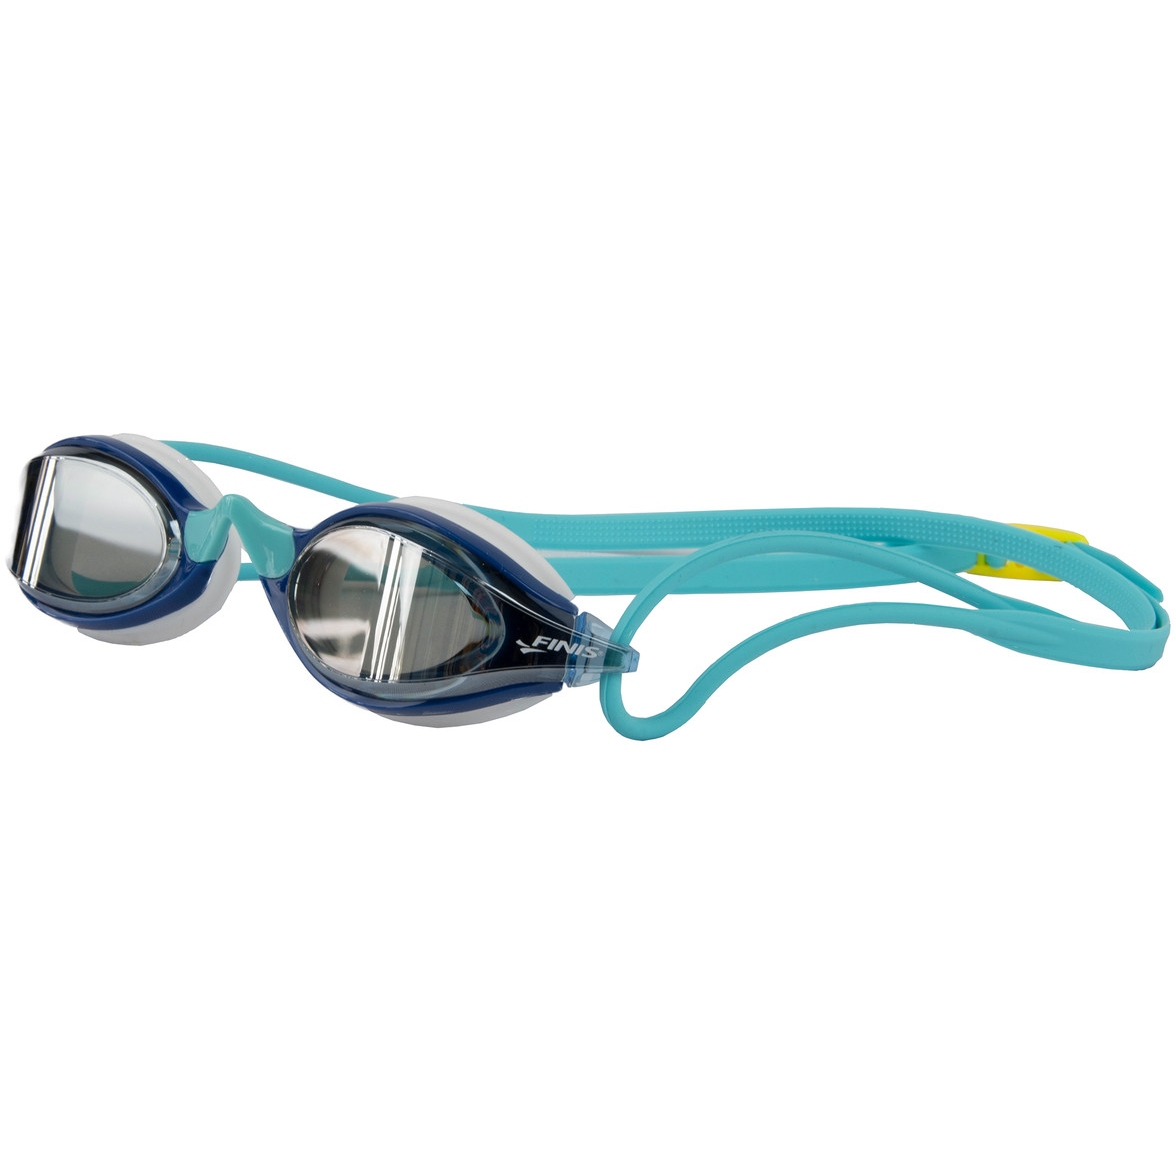 Picture of FINIS, Inc. Circuit 2 Goggle - blue mirror